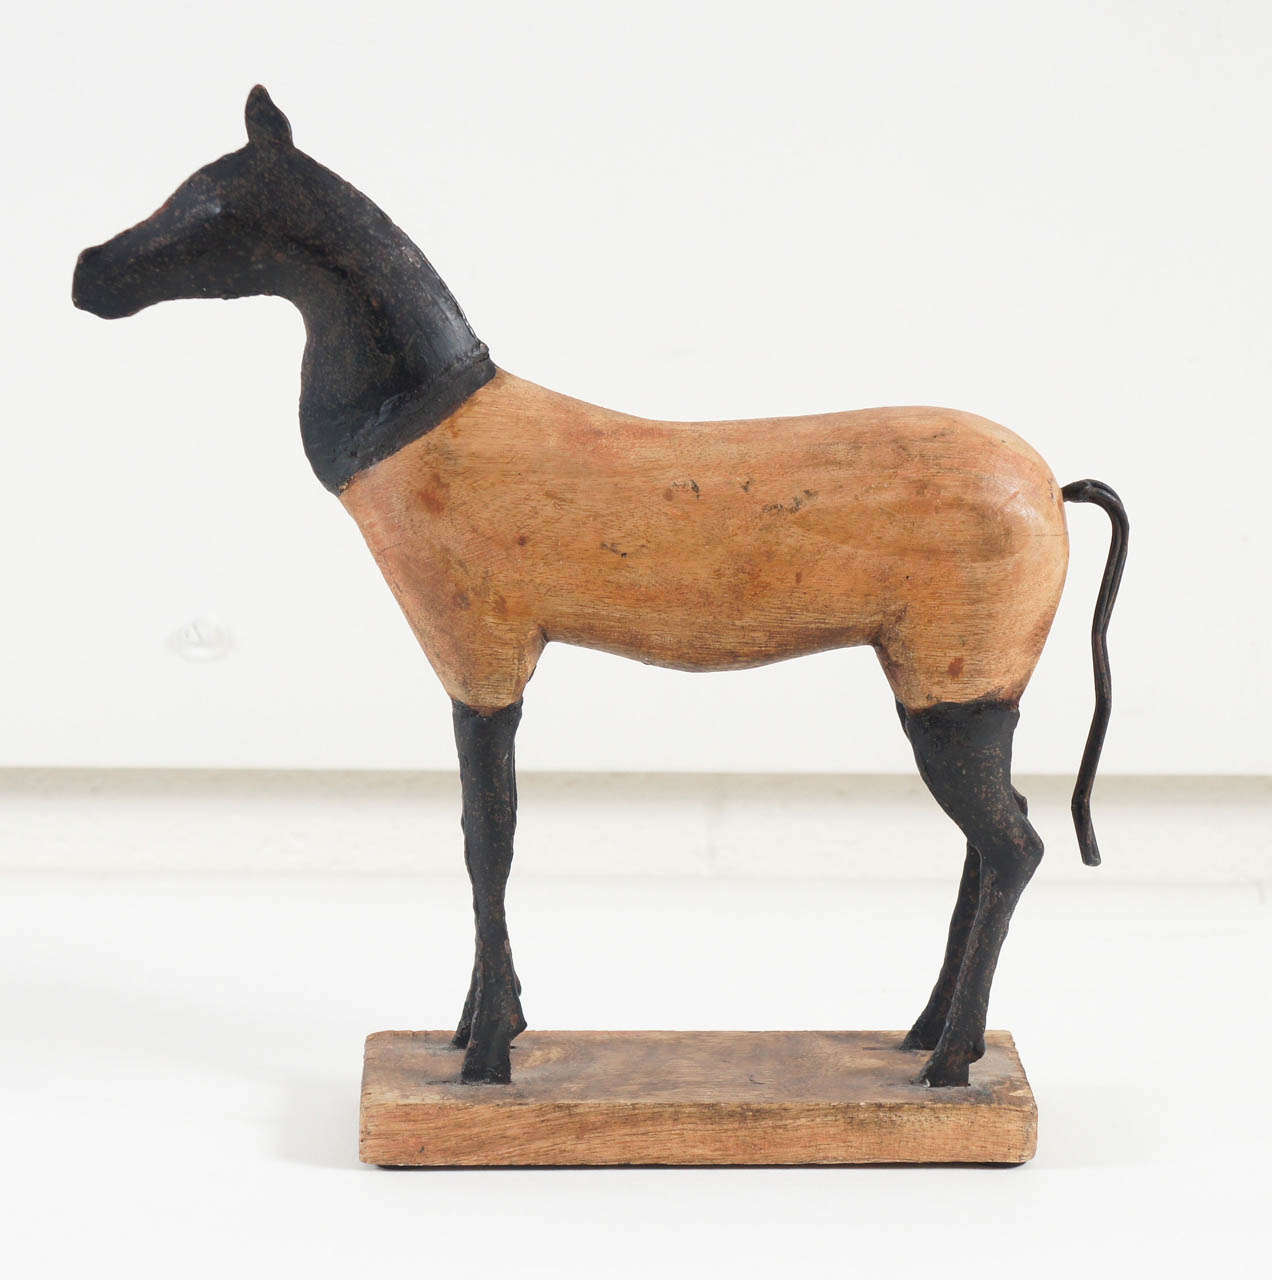 Here is a horse sculpture in a primitive style made of carved wood and blackened metal. The sculpture is mounted to a wooden base.